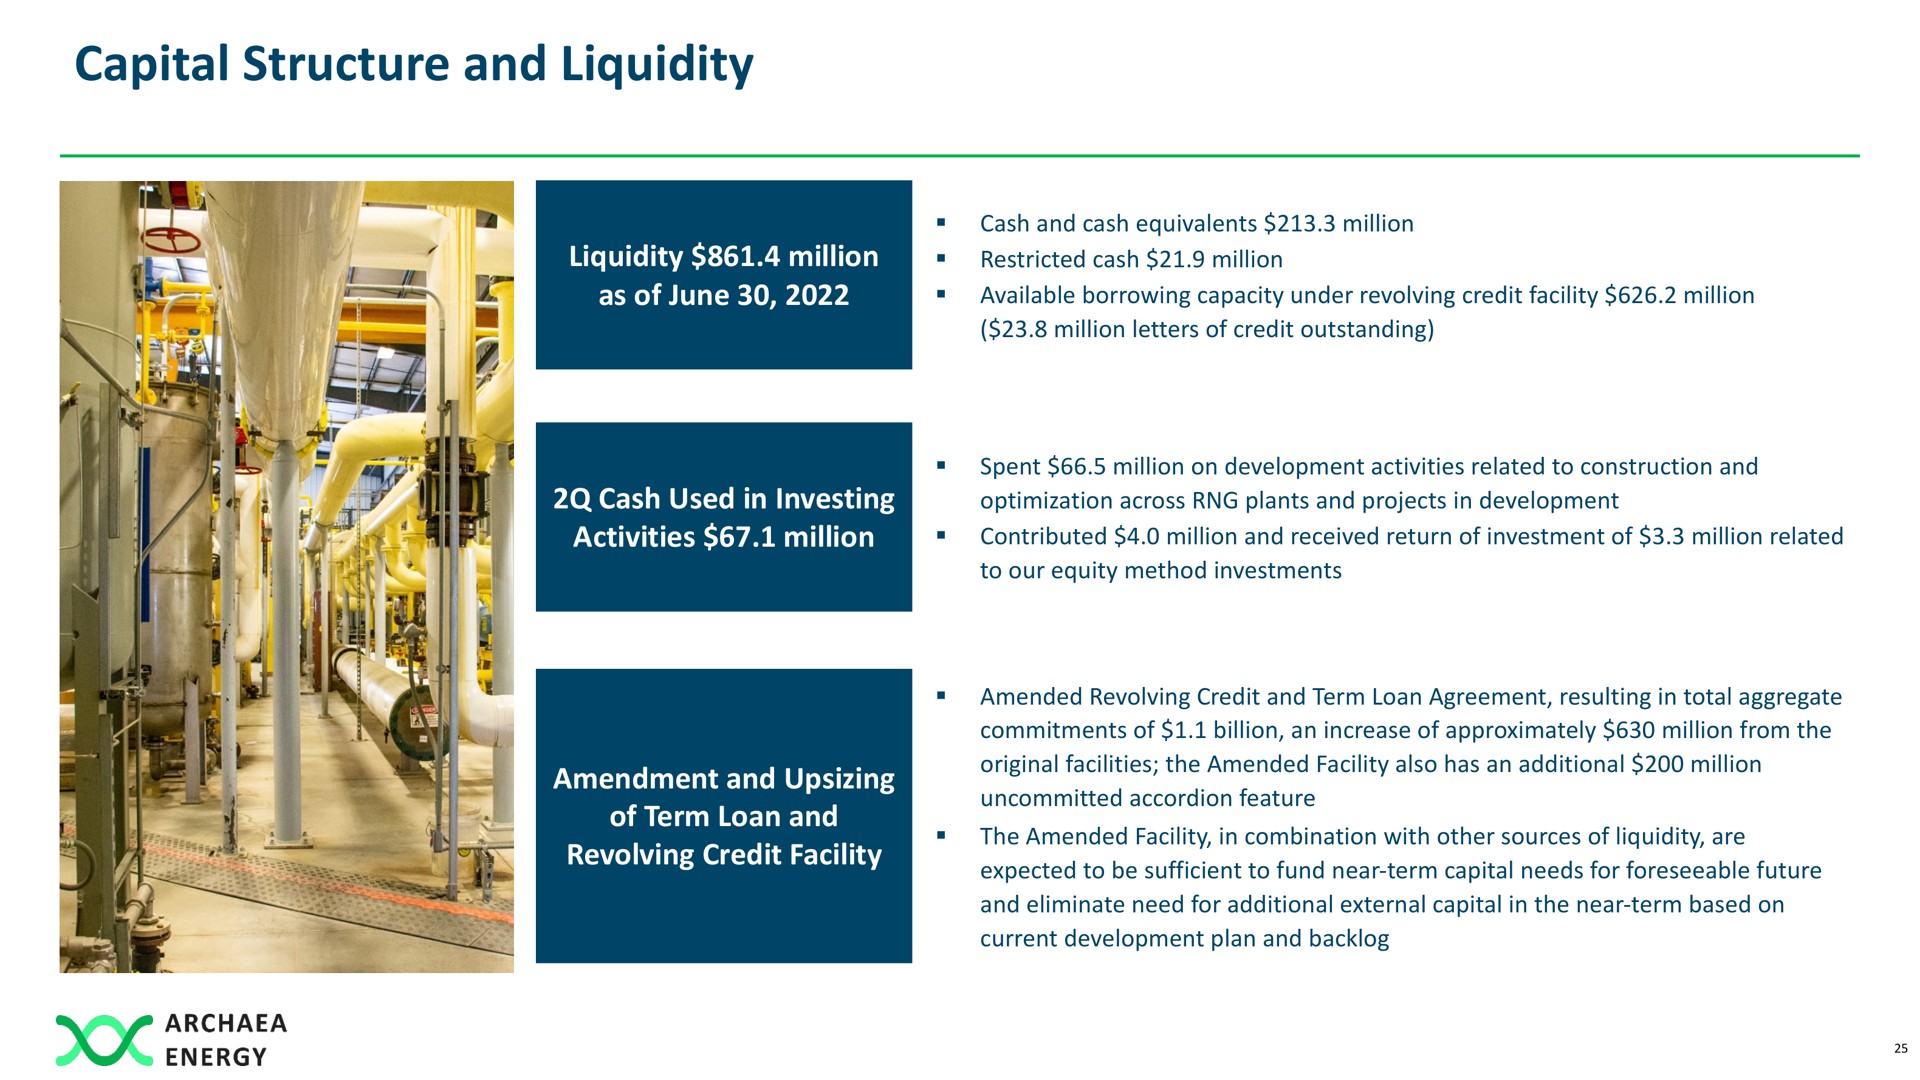 capital structure and liquidity | Archaea Energy